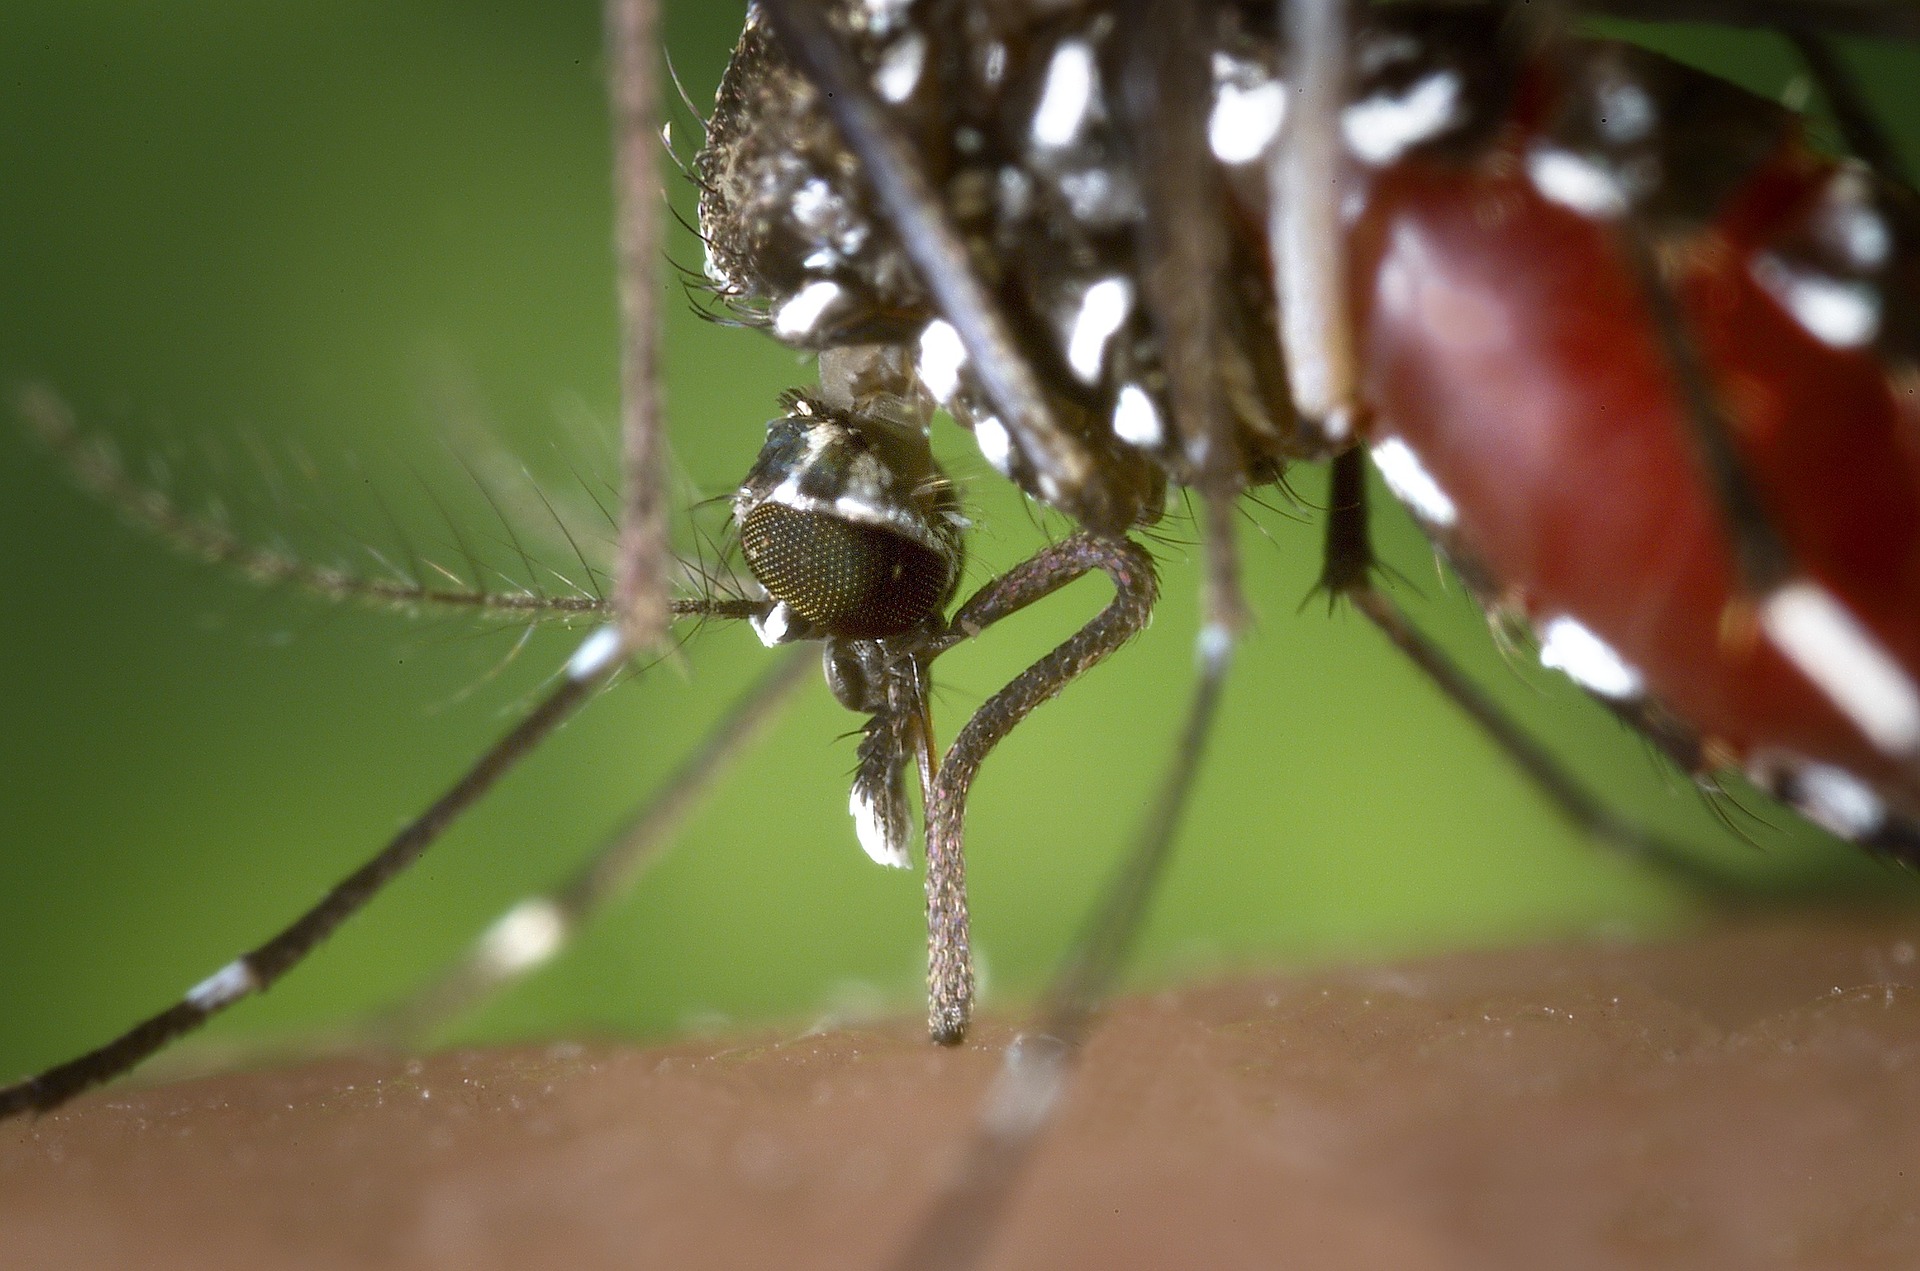 Image of Aedes mosquito. More Aedes mosquitoes calls for new dengue treatments.